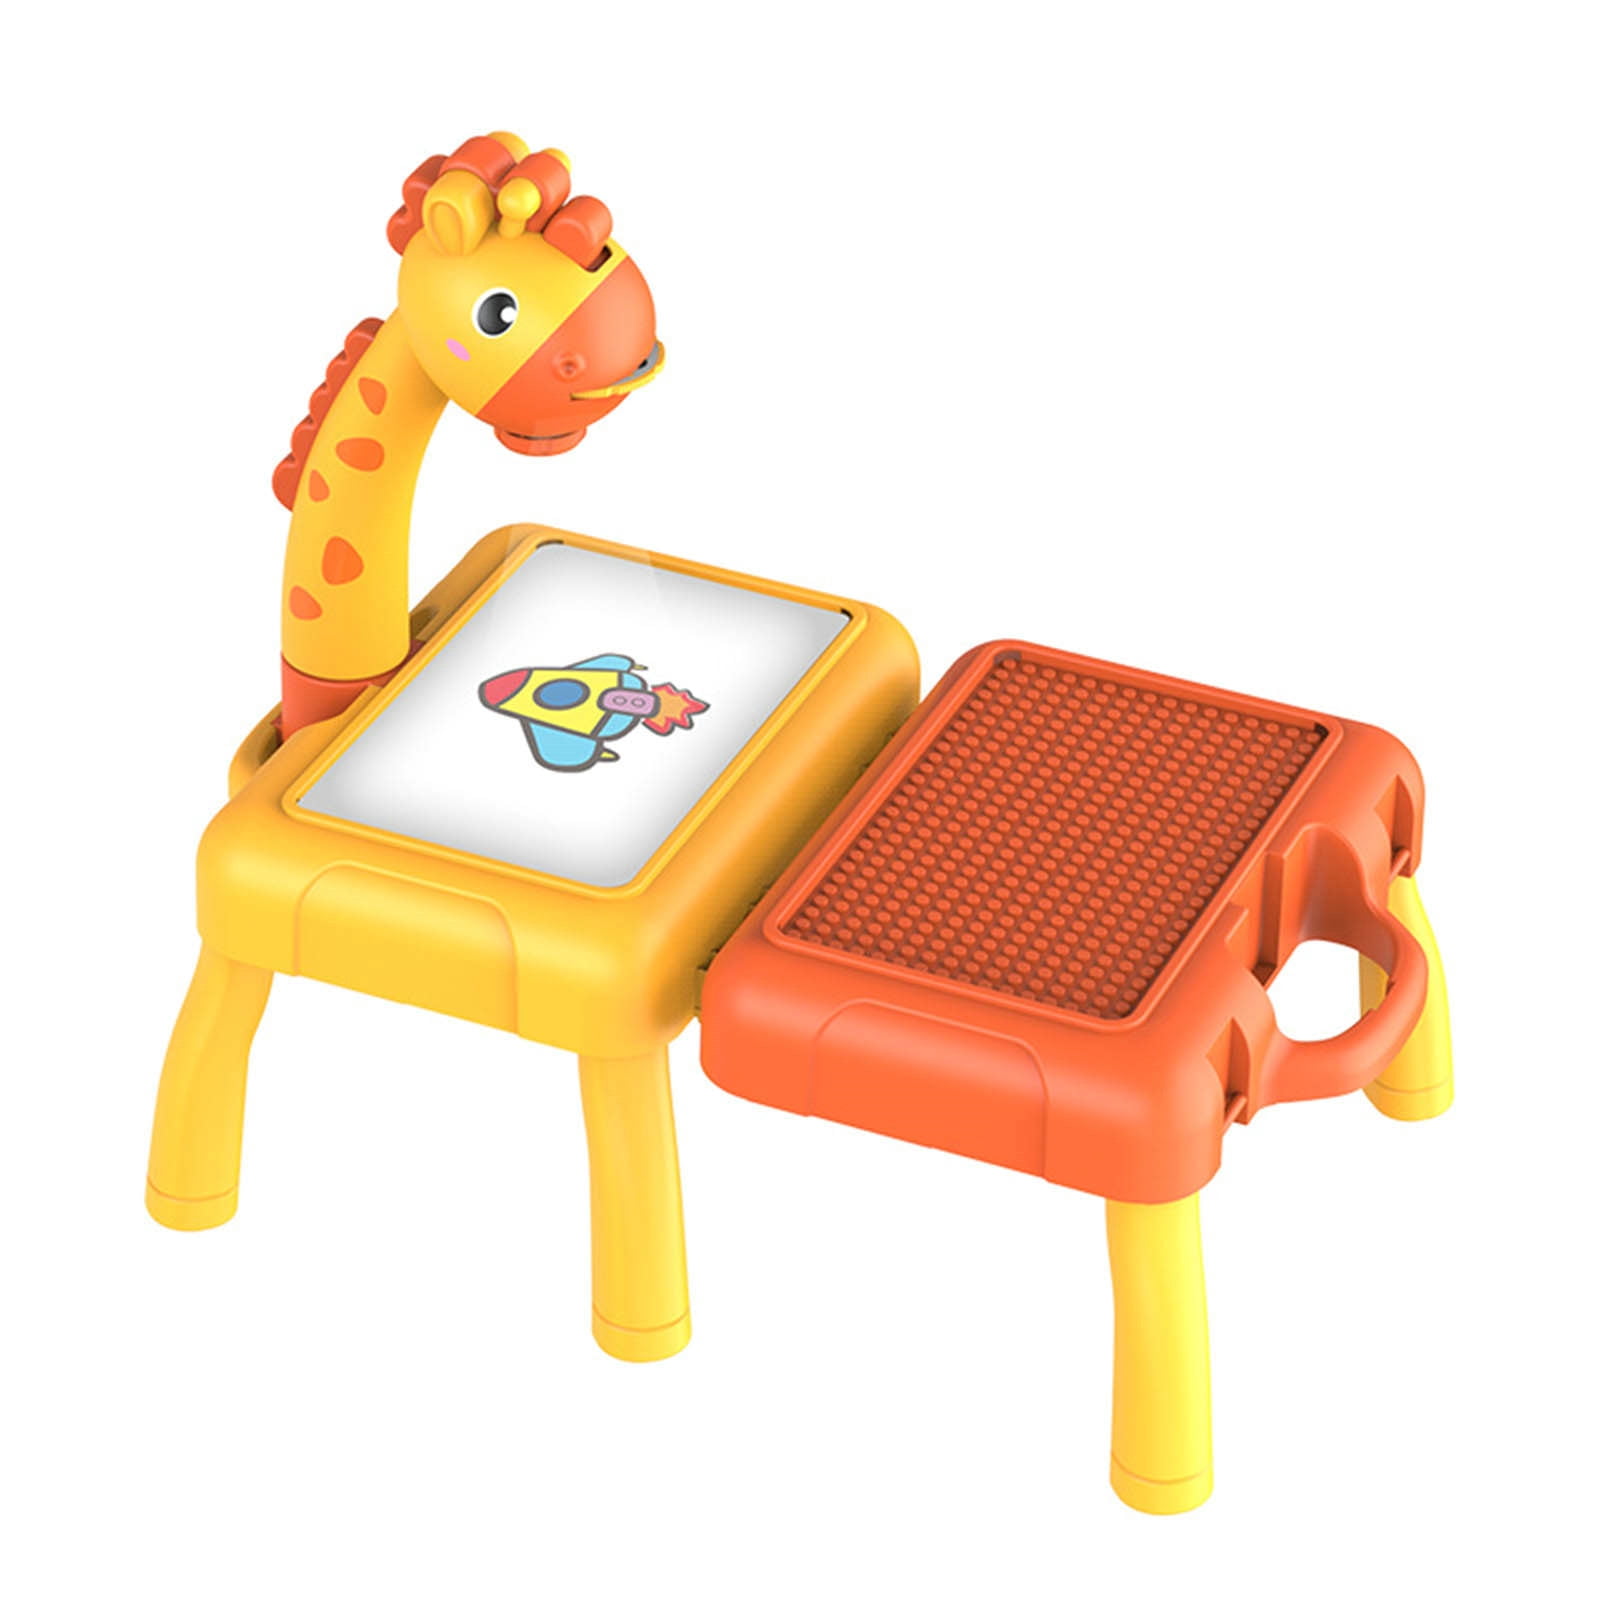 DINOSAUR TABLE WITH PROJECTOR FOR DRAWING + ACCESSORIES COLOUR BLUE, Toys  \ Blackboards